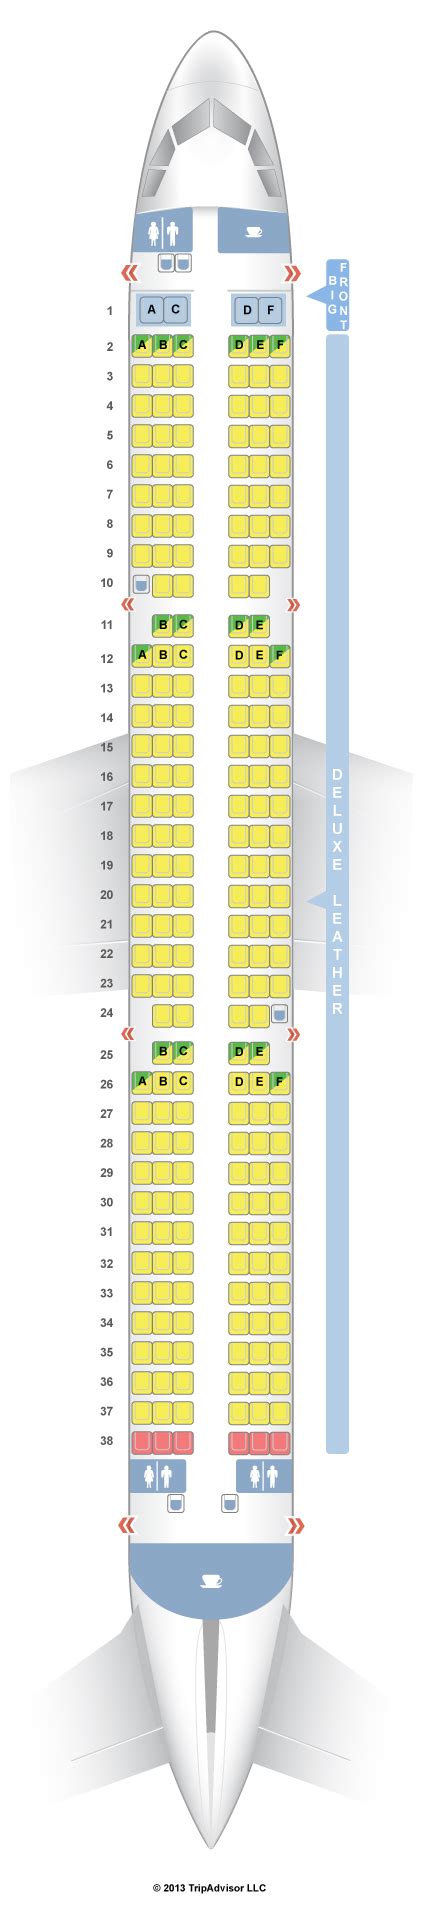 Spirit Airlines Airbus A320 aircraft seat map. Spirit Airlines flies the Airbus A320-200 as part of its strategy to maintain a cost-effective fleet. The A320-200 is renowned for its fuel efficiency, which aligns with Spirit's low-cost operational model. Its capacity of up to 182 passengers allows for high-density seating, maximizing revenue on ...